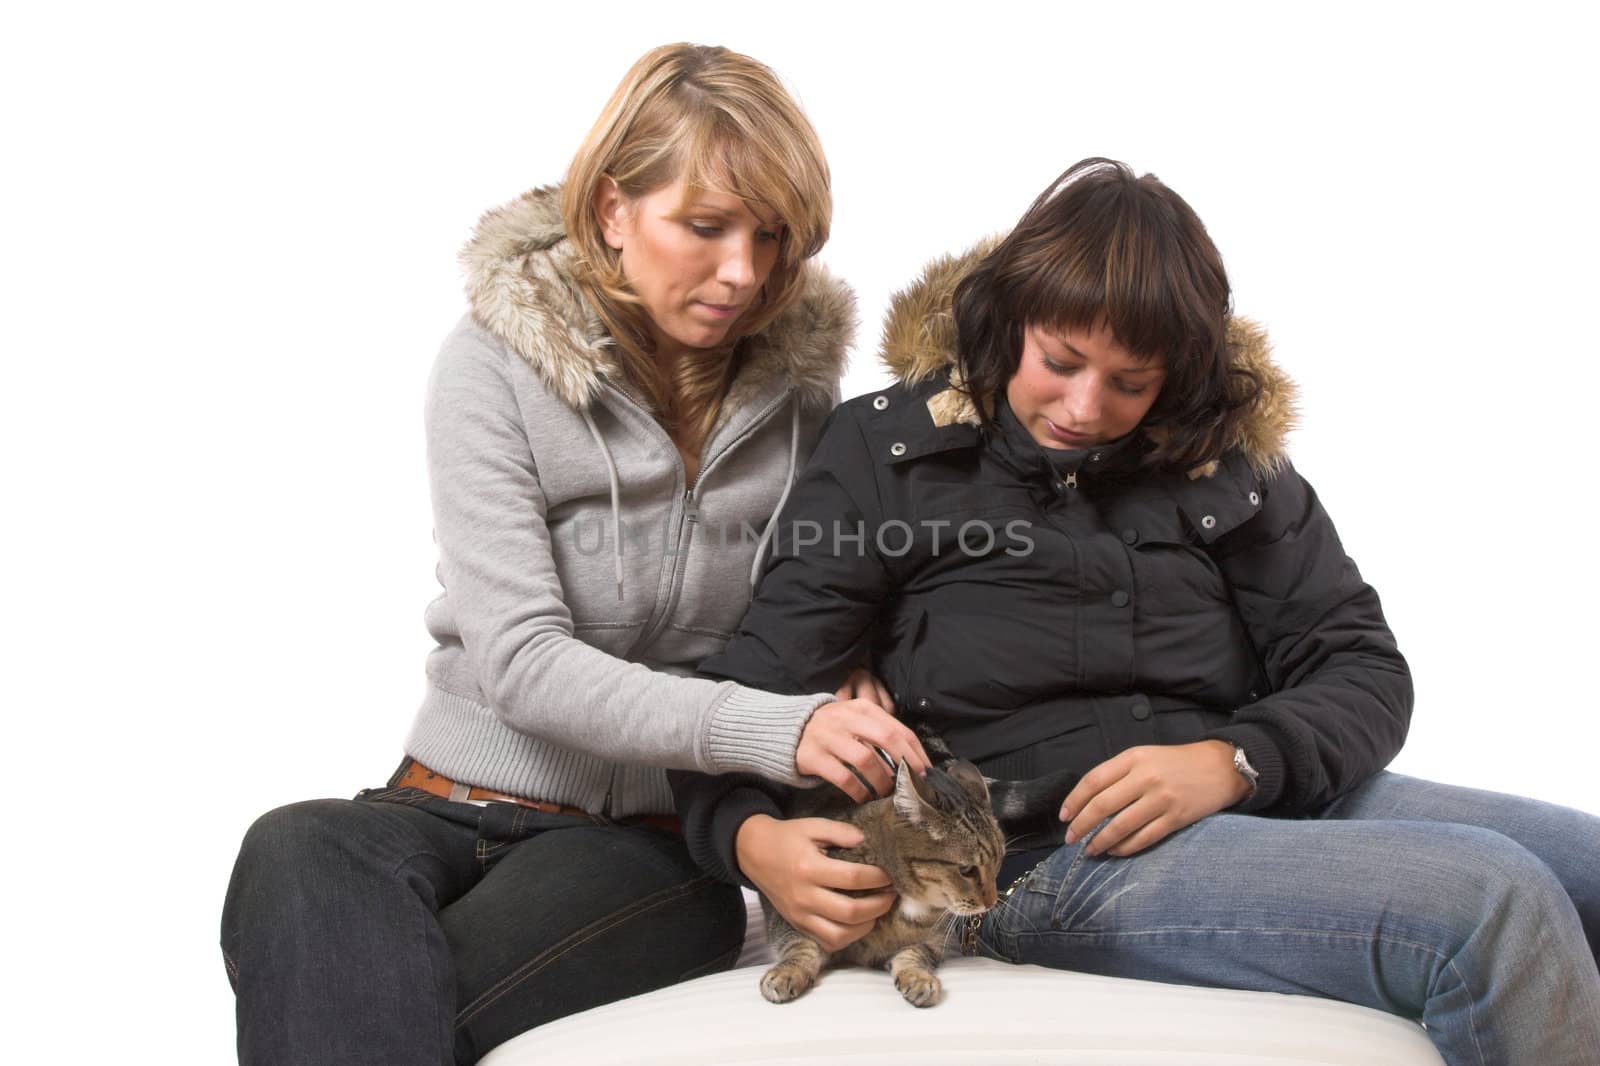 Two girl stroking the cat who looks a bit unwilling 